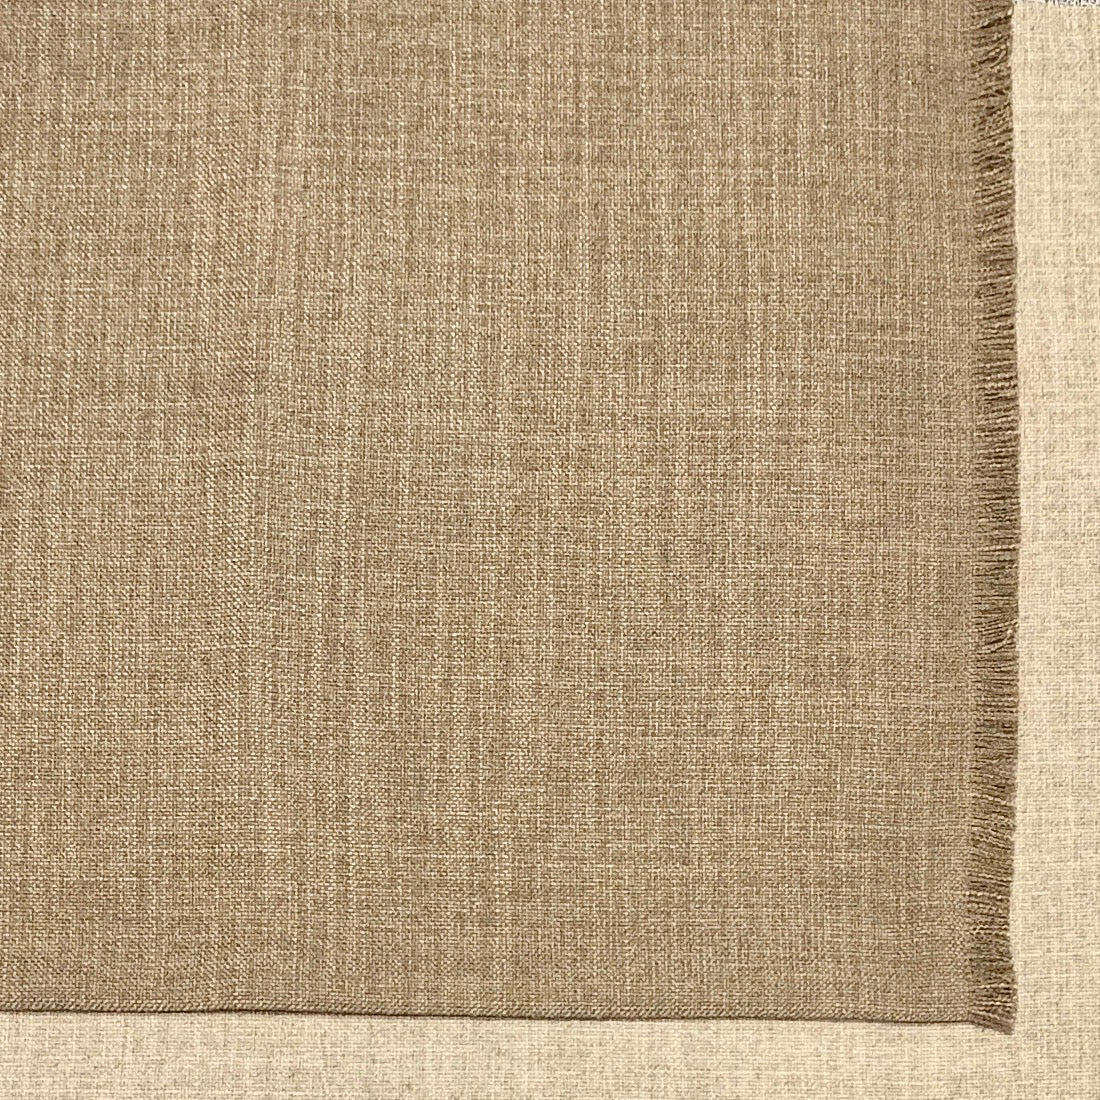 Nomad Heathered Placemat -Dune